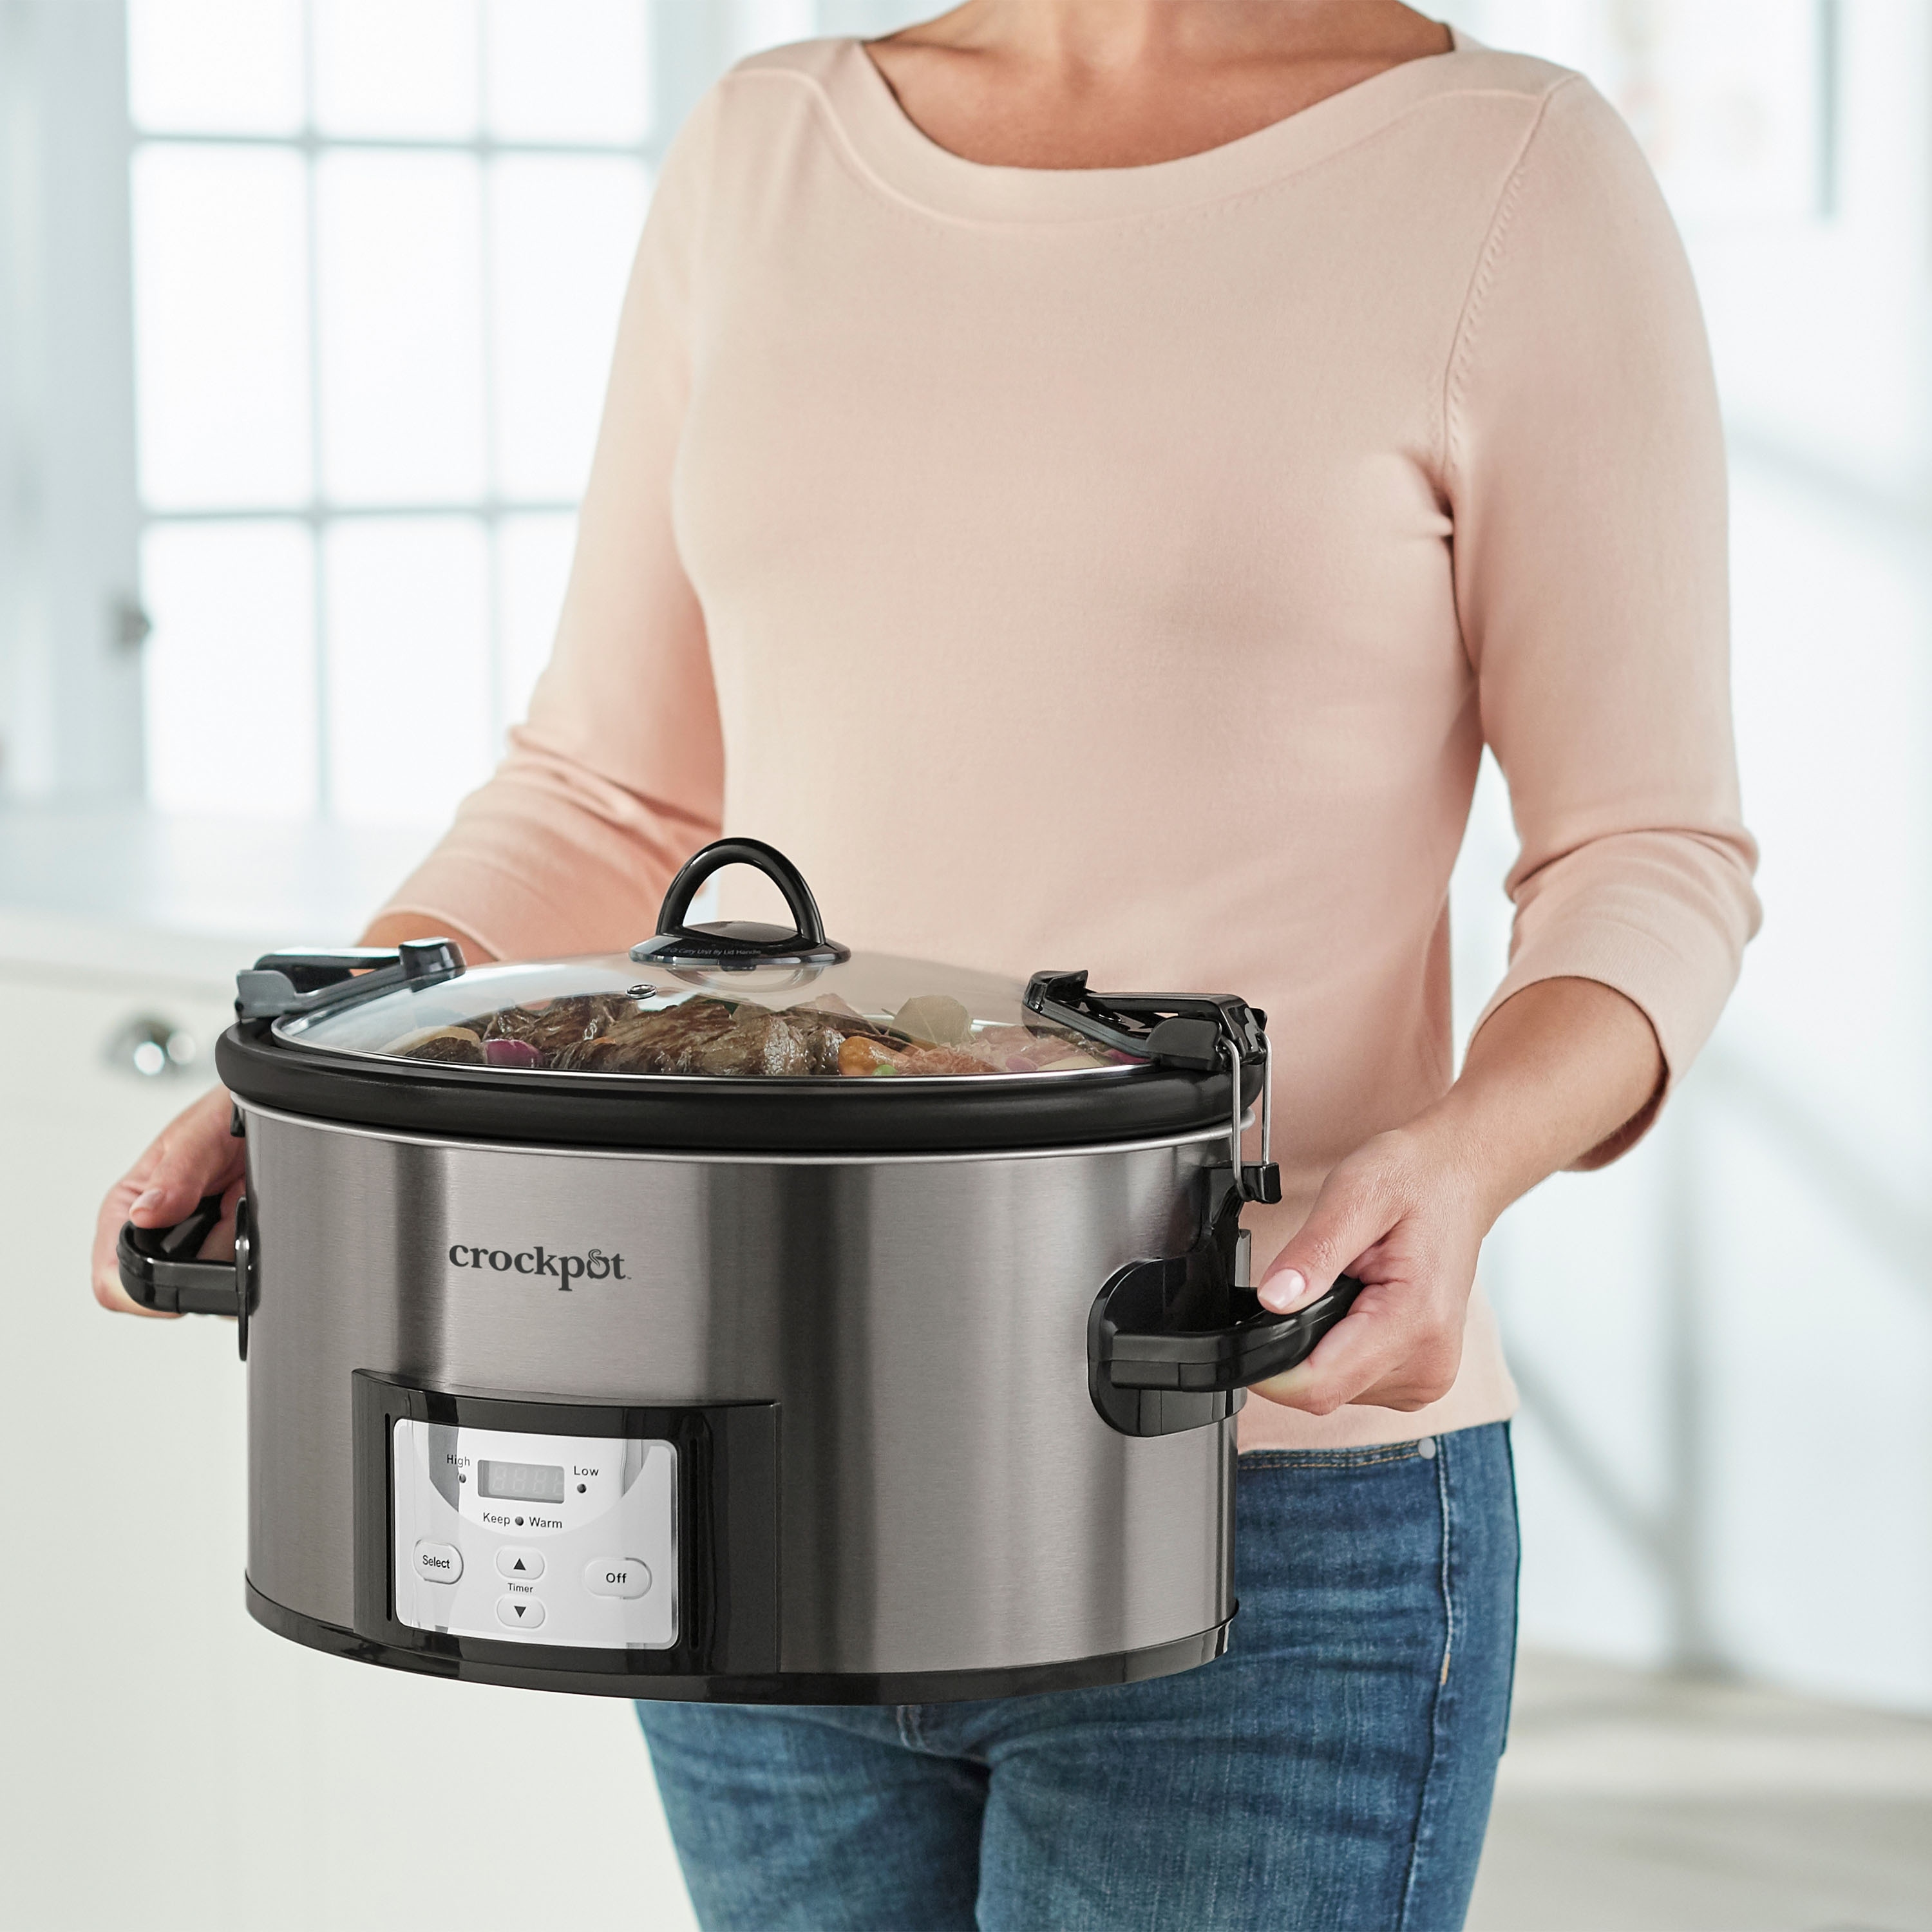 https://ak1.ostkcdn.com/images/products/is/images/direct/7f9275e761cdfb627837ef750723cf795e5ddeae/Crockpot-7-Quart-Easy-to-Clean-Cook-%26-Carry-Slow-Cooker%2C-Black-Stainless-Steel.jpg